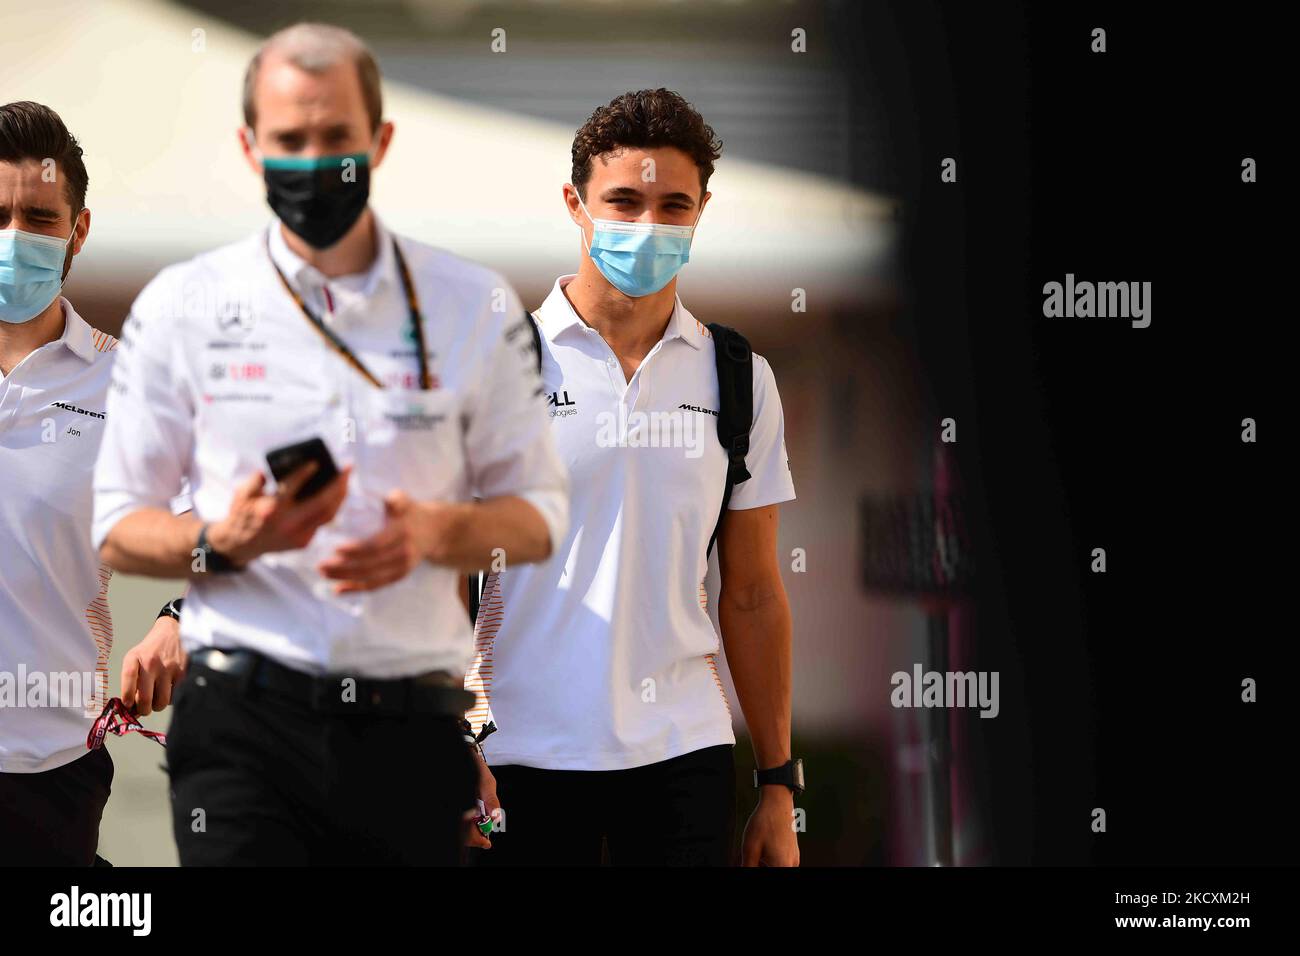 Lando Norris McLaren F1 Team arrived in to the paddock before qualifying session of last race of the year in Yes Marina Circuit, Yes Island, Abu Dhabi, Uniter Arab Emirates, 11 December 2021 (Photo by Andrea Diodato/NurPhoto) Stock Photo